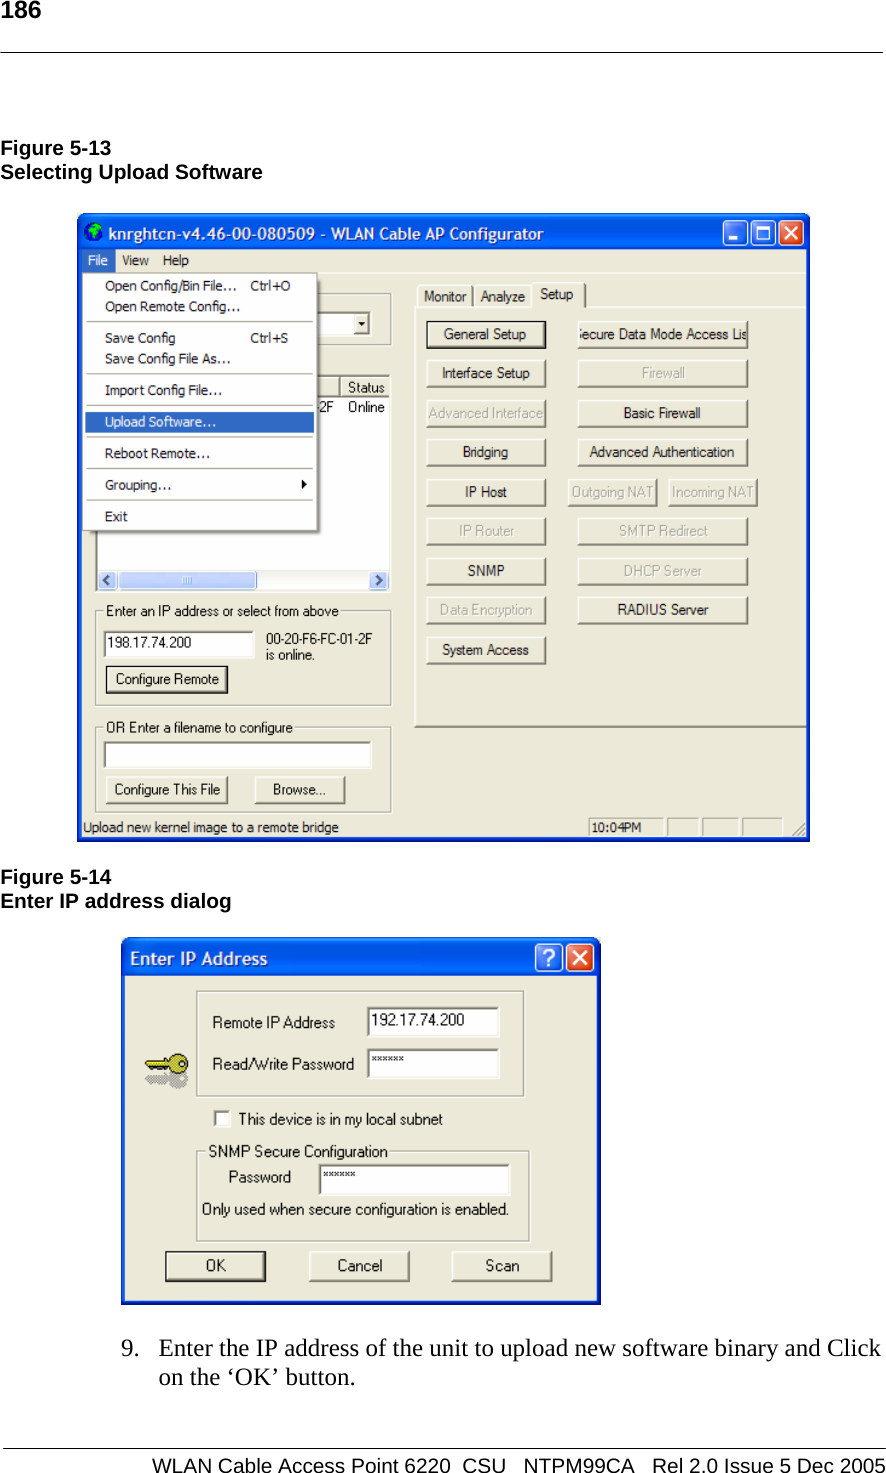   186    WLAN Cable Access Point 6220  CSU   NTPM99CA   Rel 2.0 Issue 5 Dec 2005  Figure 5-13 Selecting Upload Software     Figure 5-14 Enter IP address dialog    9. Enter the IP address of the unit to upload new software binary and Click on the ‘OK’ button.   